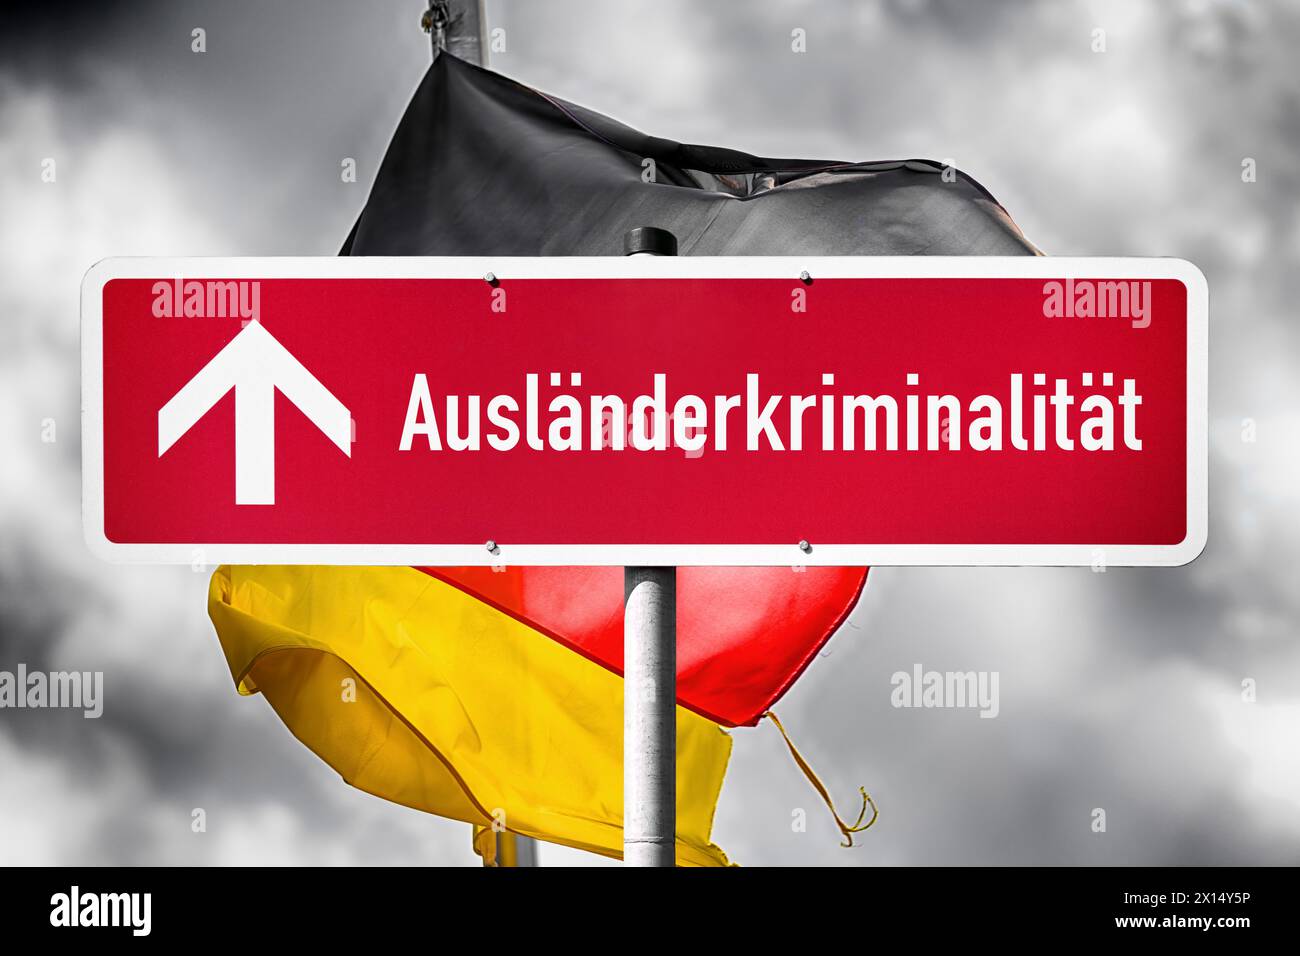 Red Sign With The Inscription Ausländerkriminalität And A Rising Arrow In Front Of A German Flag, Photomontage Stock Photo